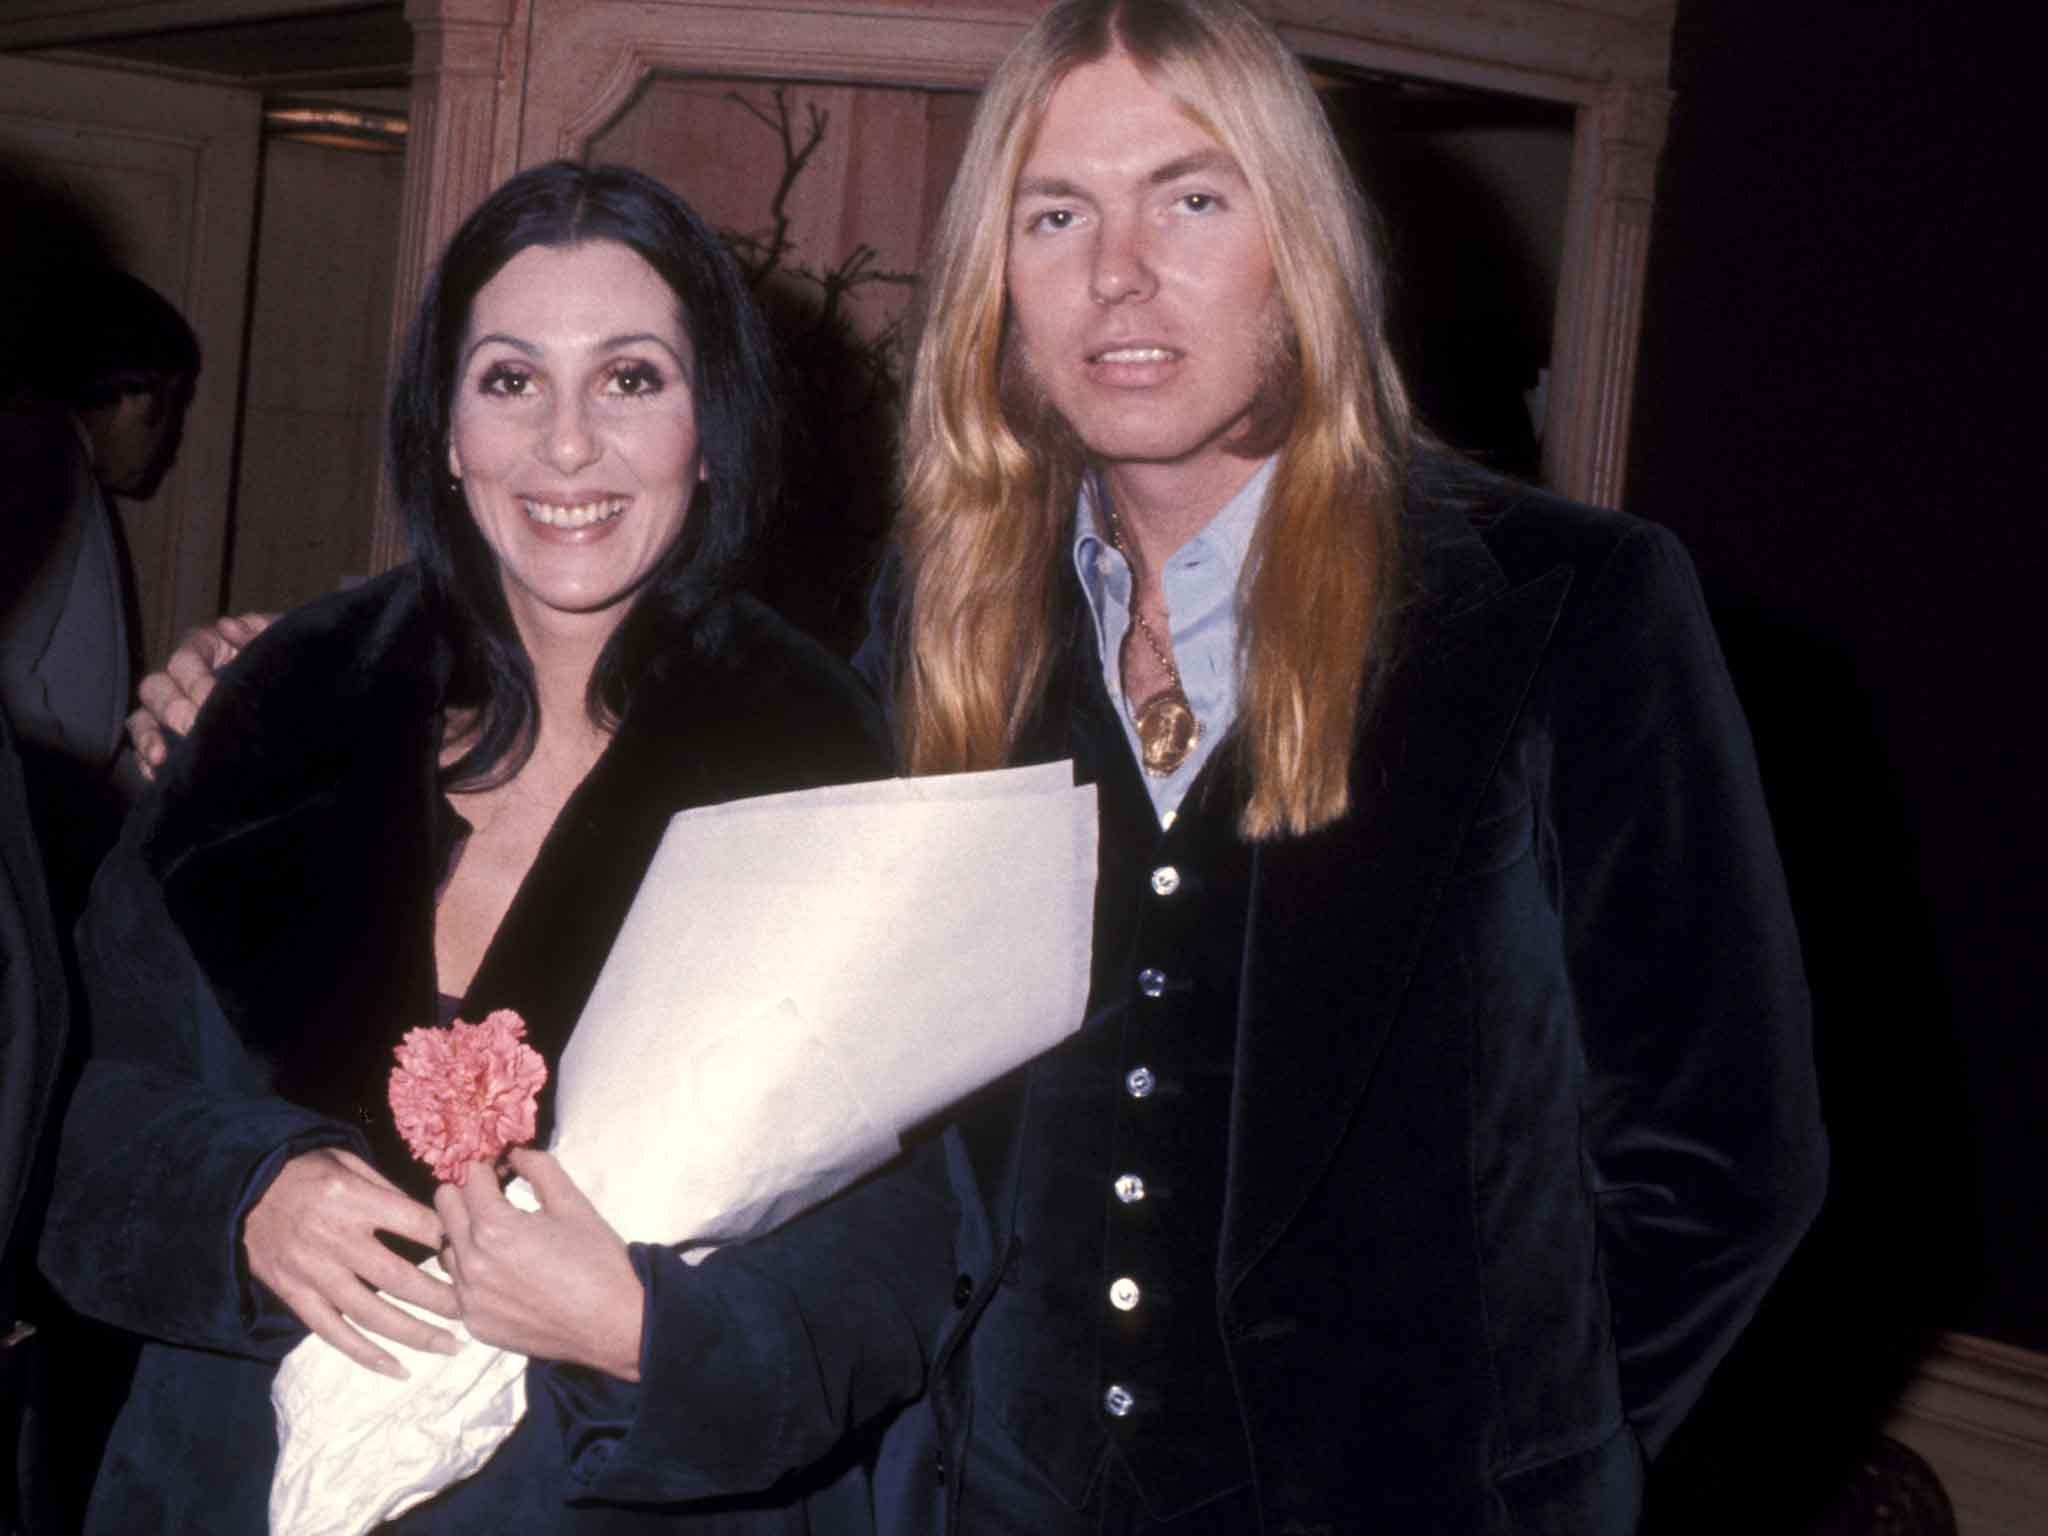 Singer Cher and Allman were married in 1975